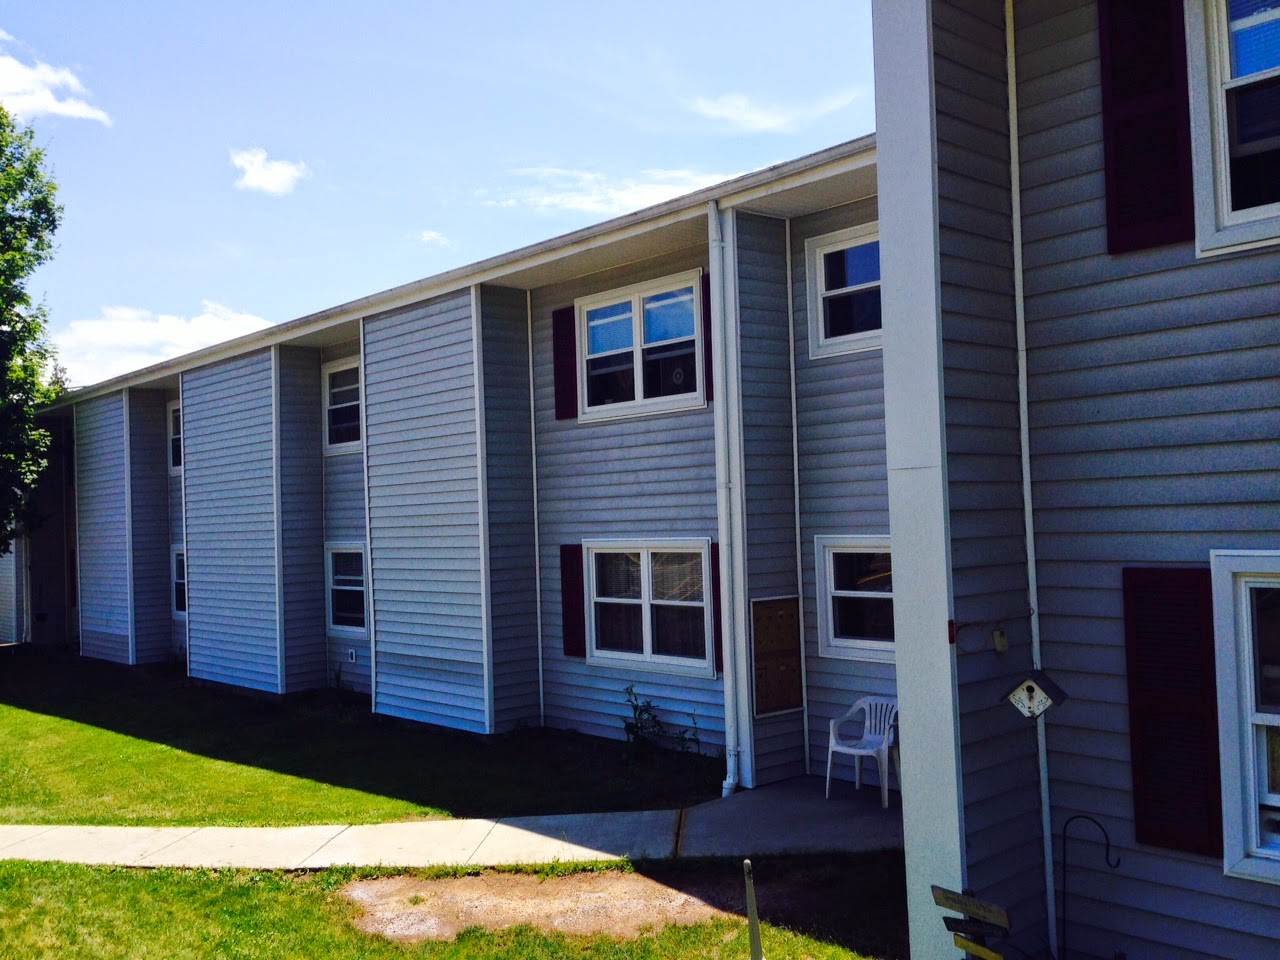 Photo of WESTBROOK APTS. Affordable housing located at 141 E ST WALTON, NY 13856